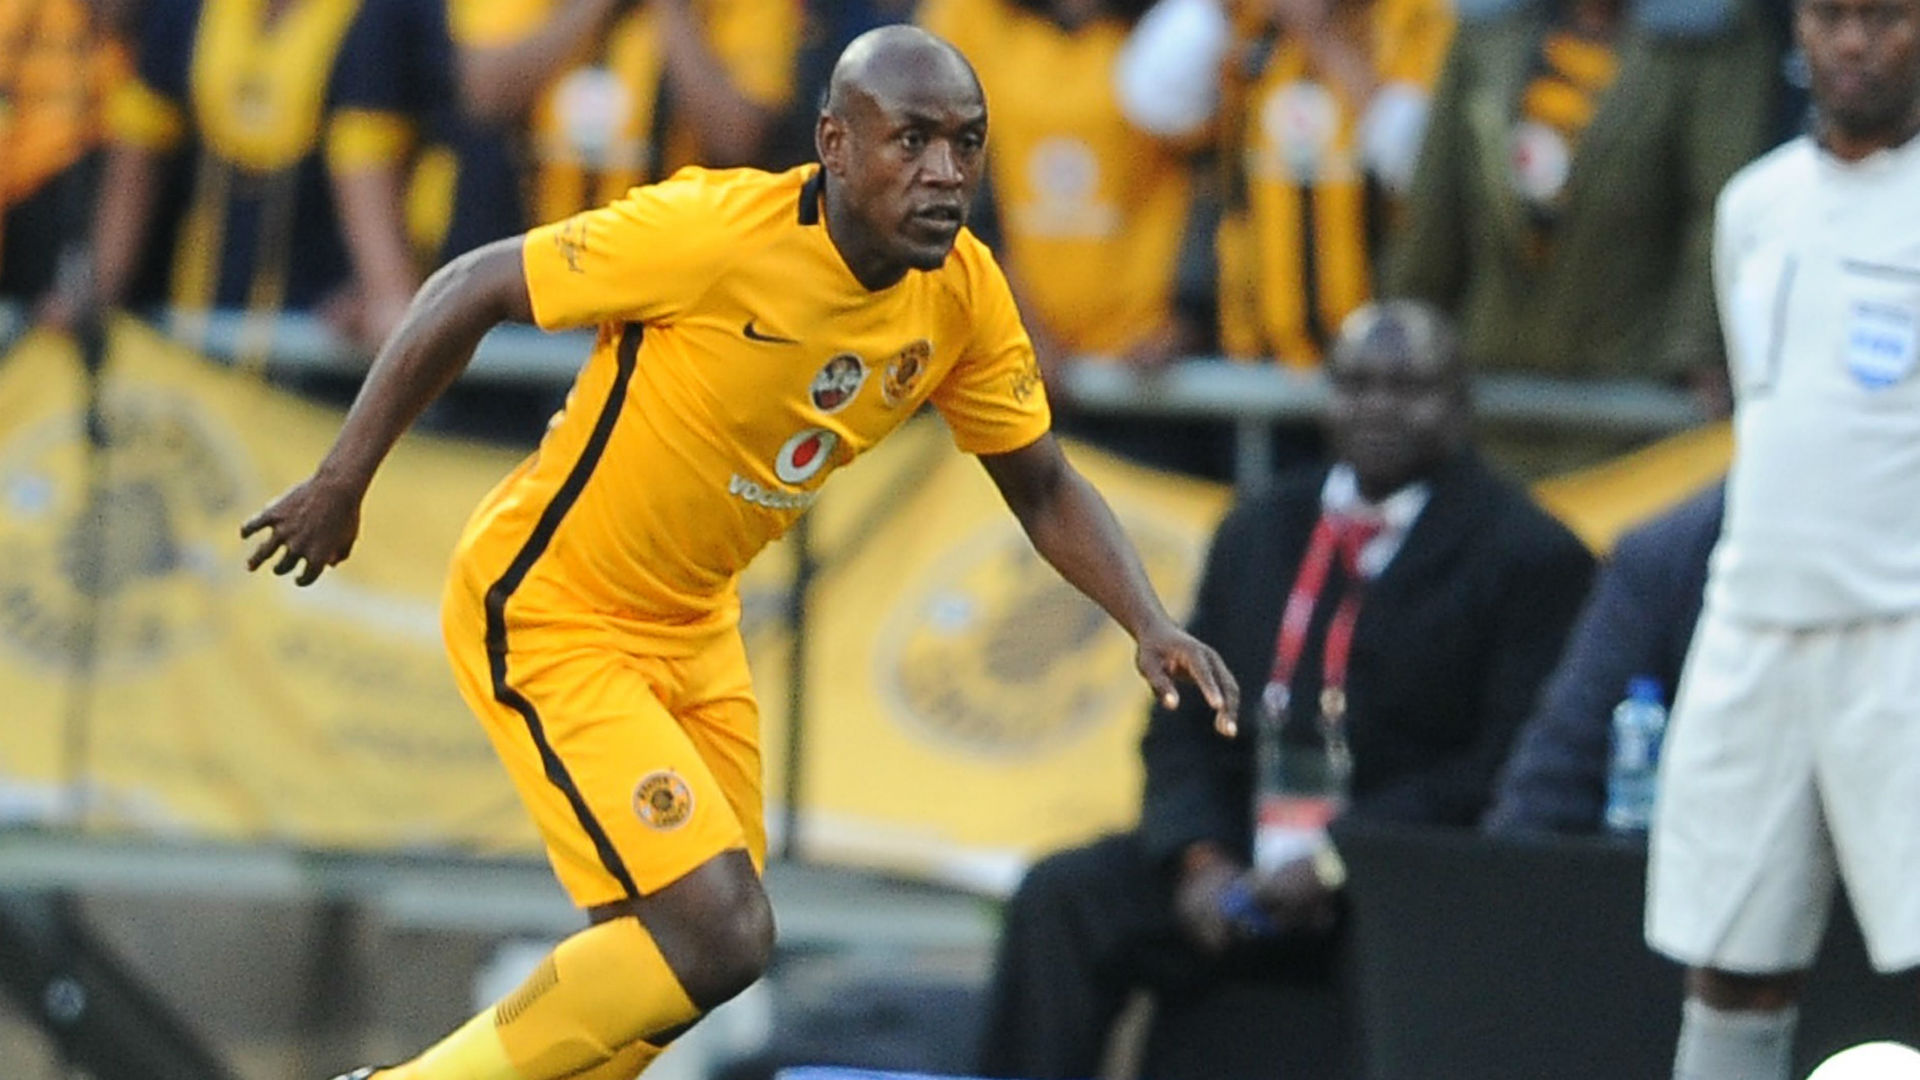 Bidvest Wits decide against signing former Kaizer Chiefs and Sundowns defender Sibusiso Khumalo